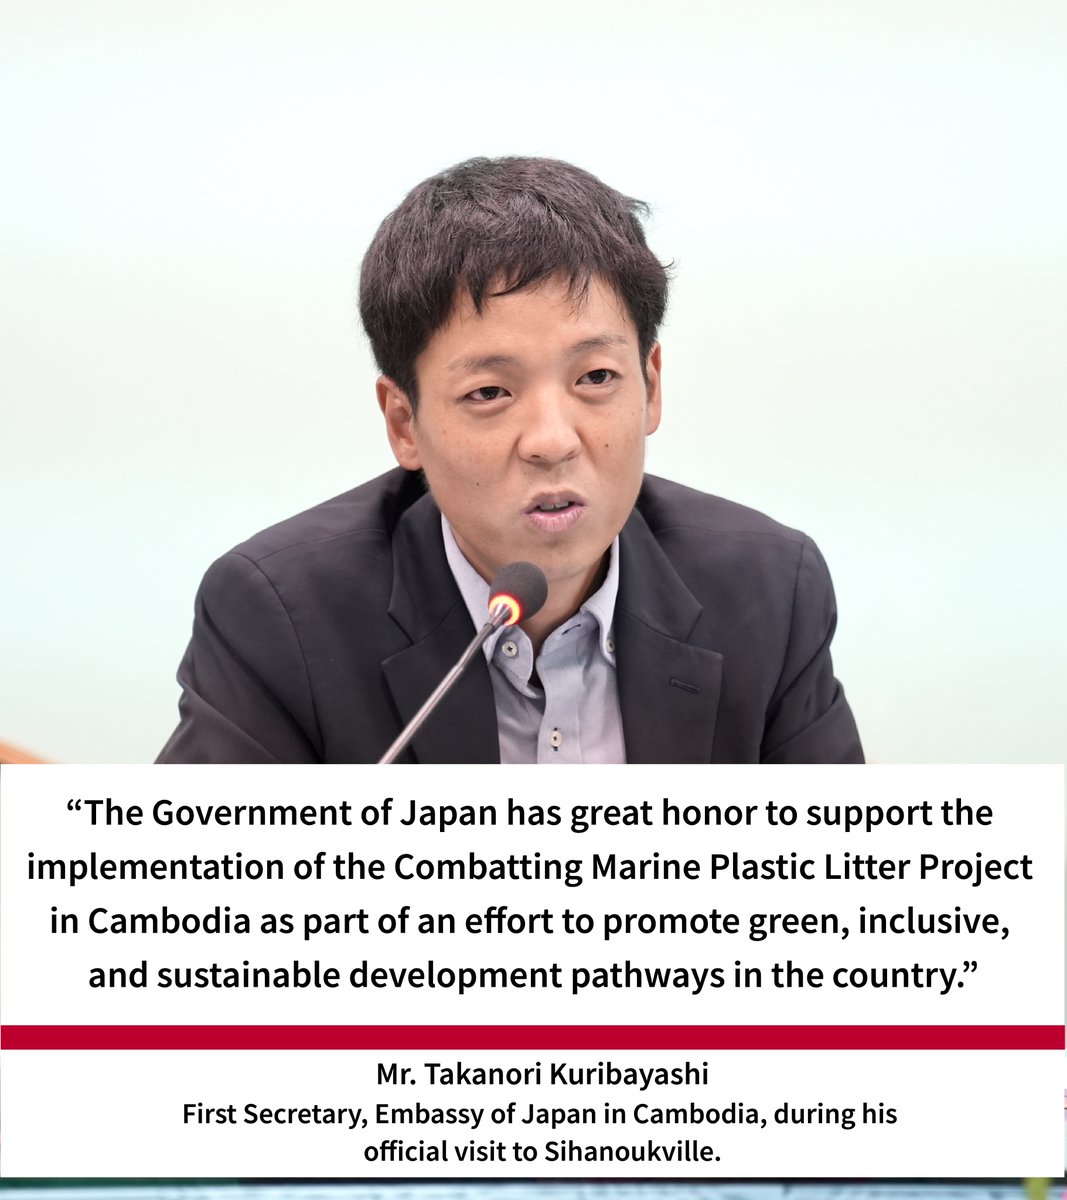 Since 2021, the Govt. of Japan🇯🇵 has supported implementation of the Combatting Marine Plastic Litter Project in🇰🇭. Led by @EnvCambodia & supported by @UNDPCambodia, this project aims to prevent & minimize plastic waste pollution on land & in the ocean by promoting 4R framework.